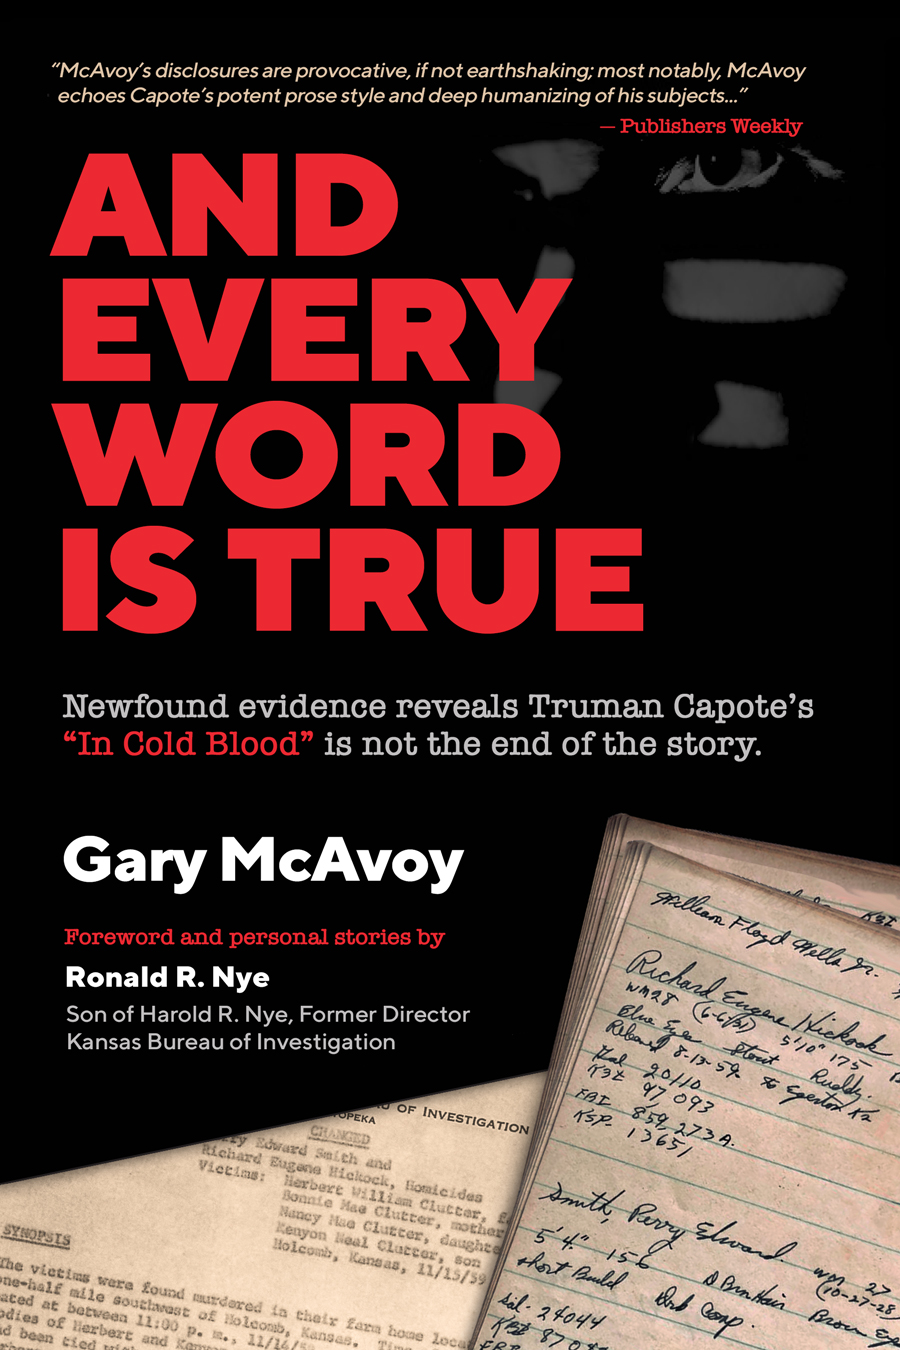 And Every Word Is True by Gary McAvoy